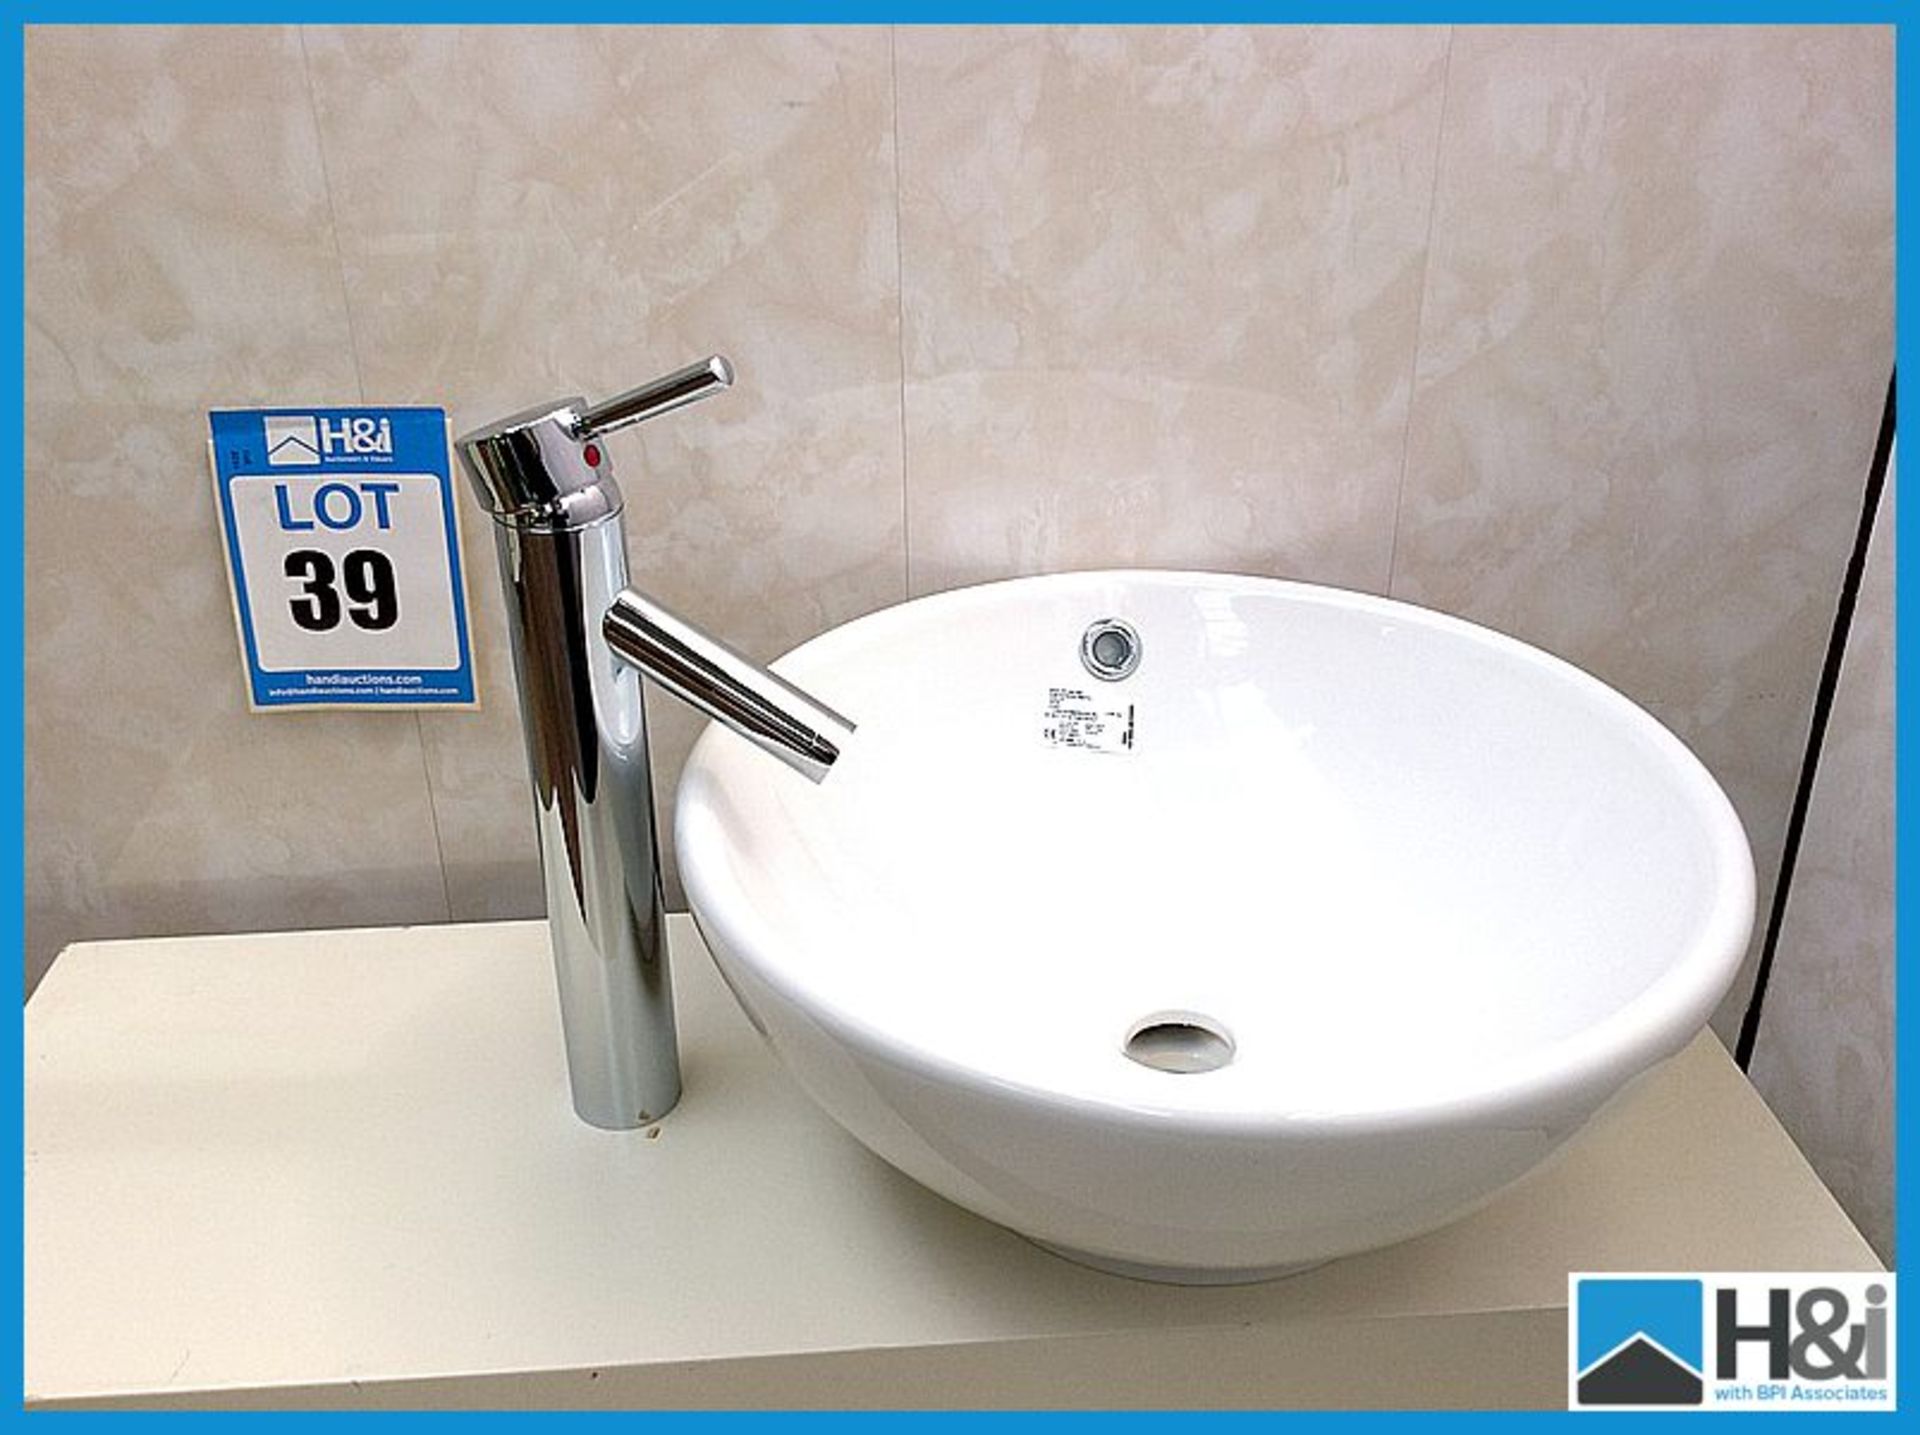 Lecico 430 White Round Basin with Chrome Mixer Tap Normal Price 150.00GBP Appraisal: Good Serial No: